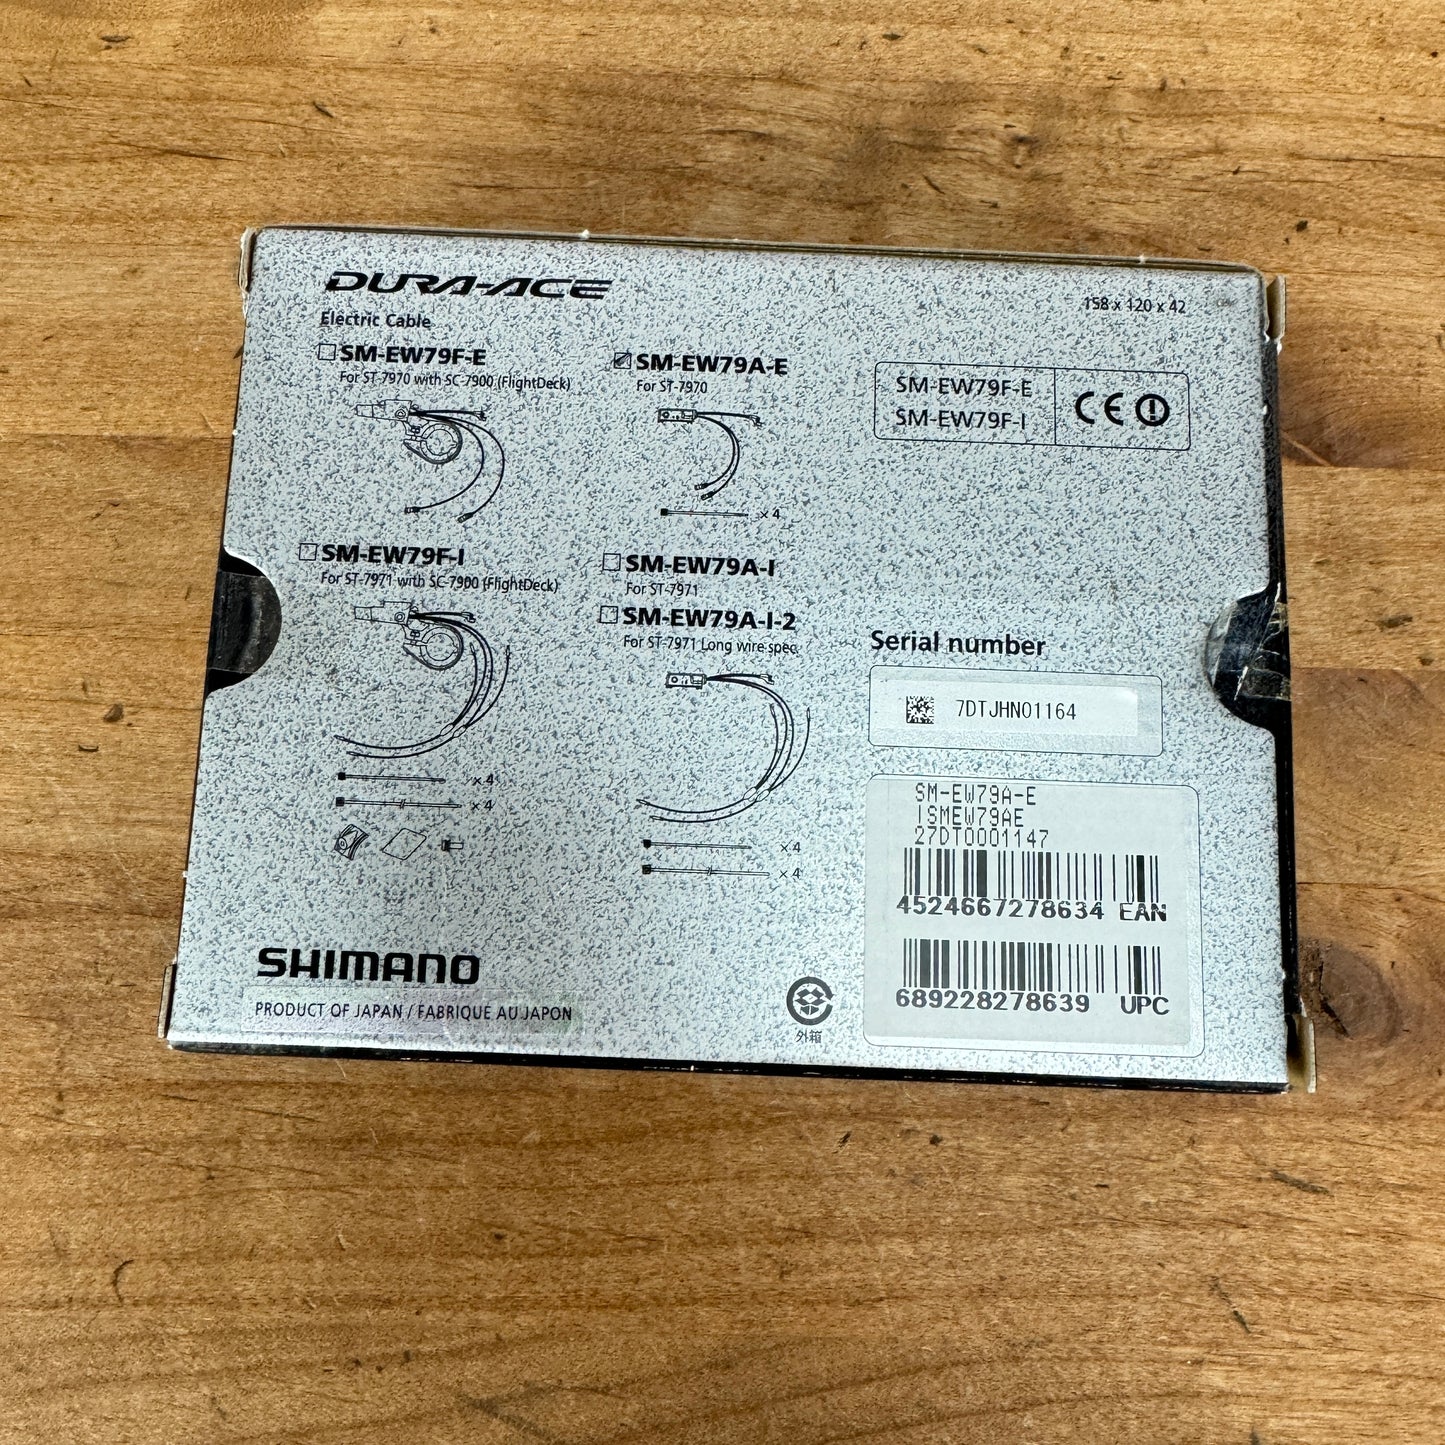 New! Shimano Dura Ace SM-EW79A-E for ST-7970 A-Junction